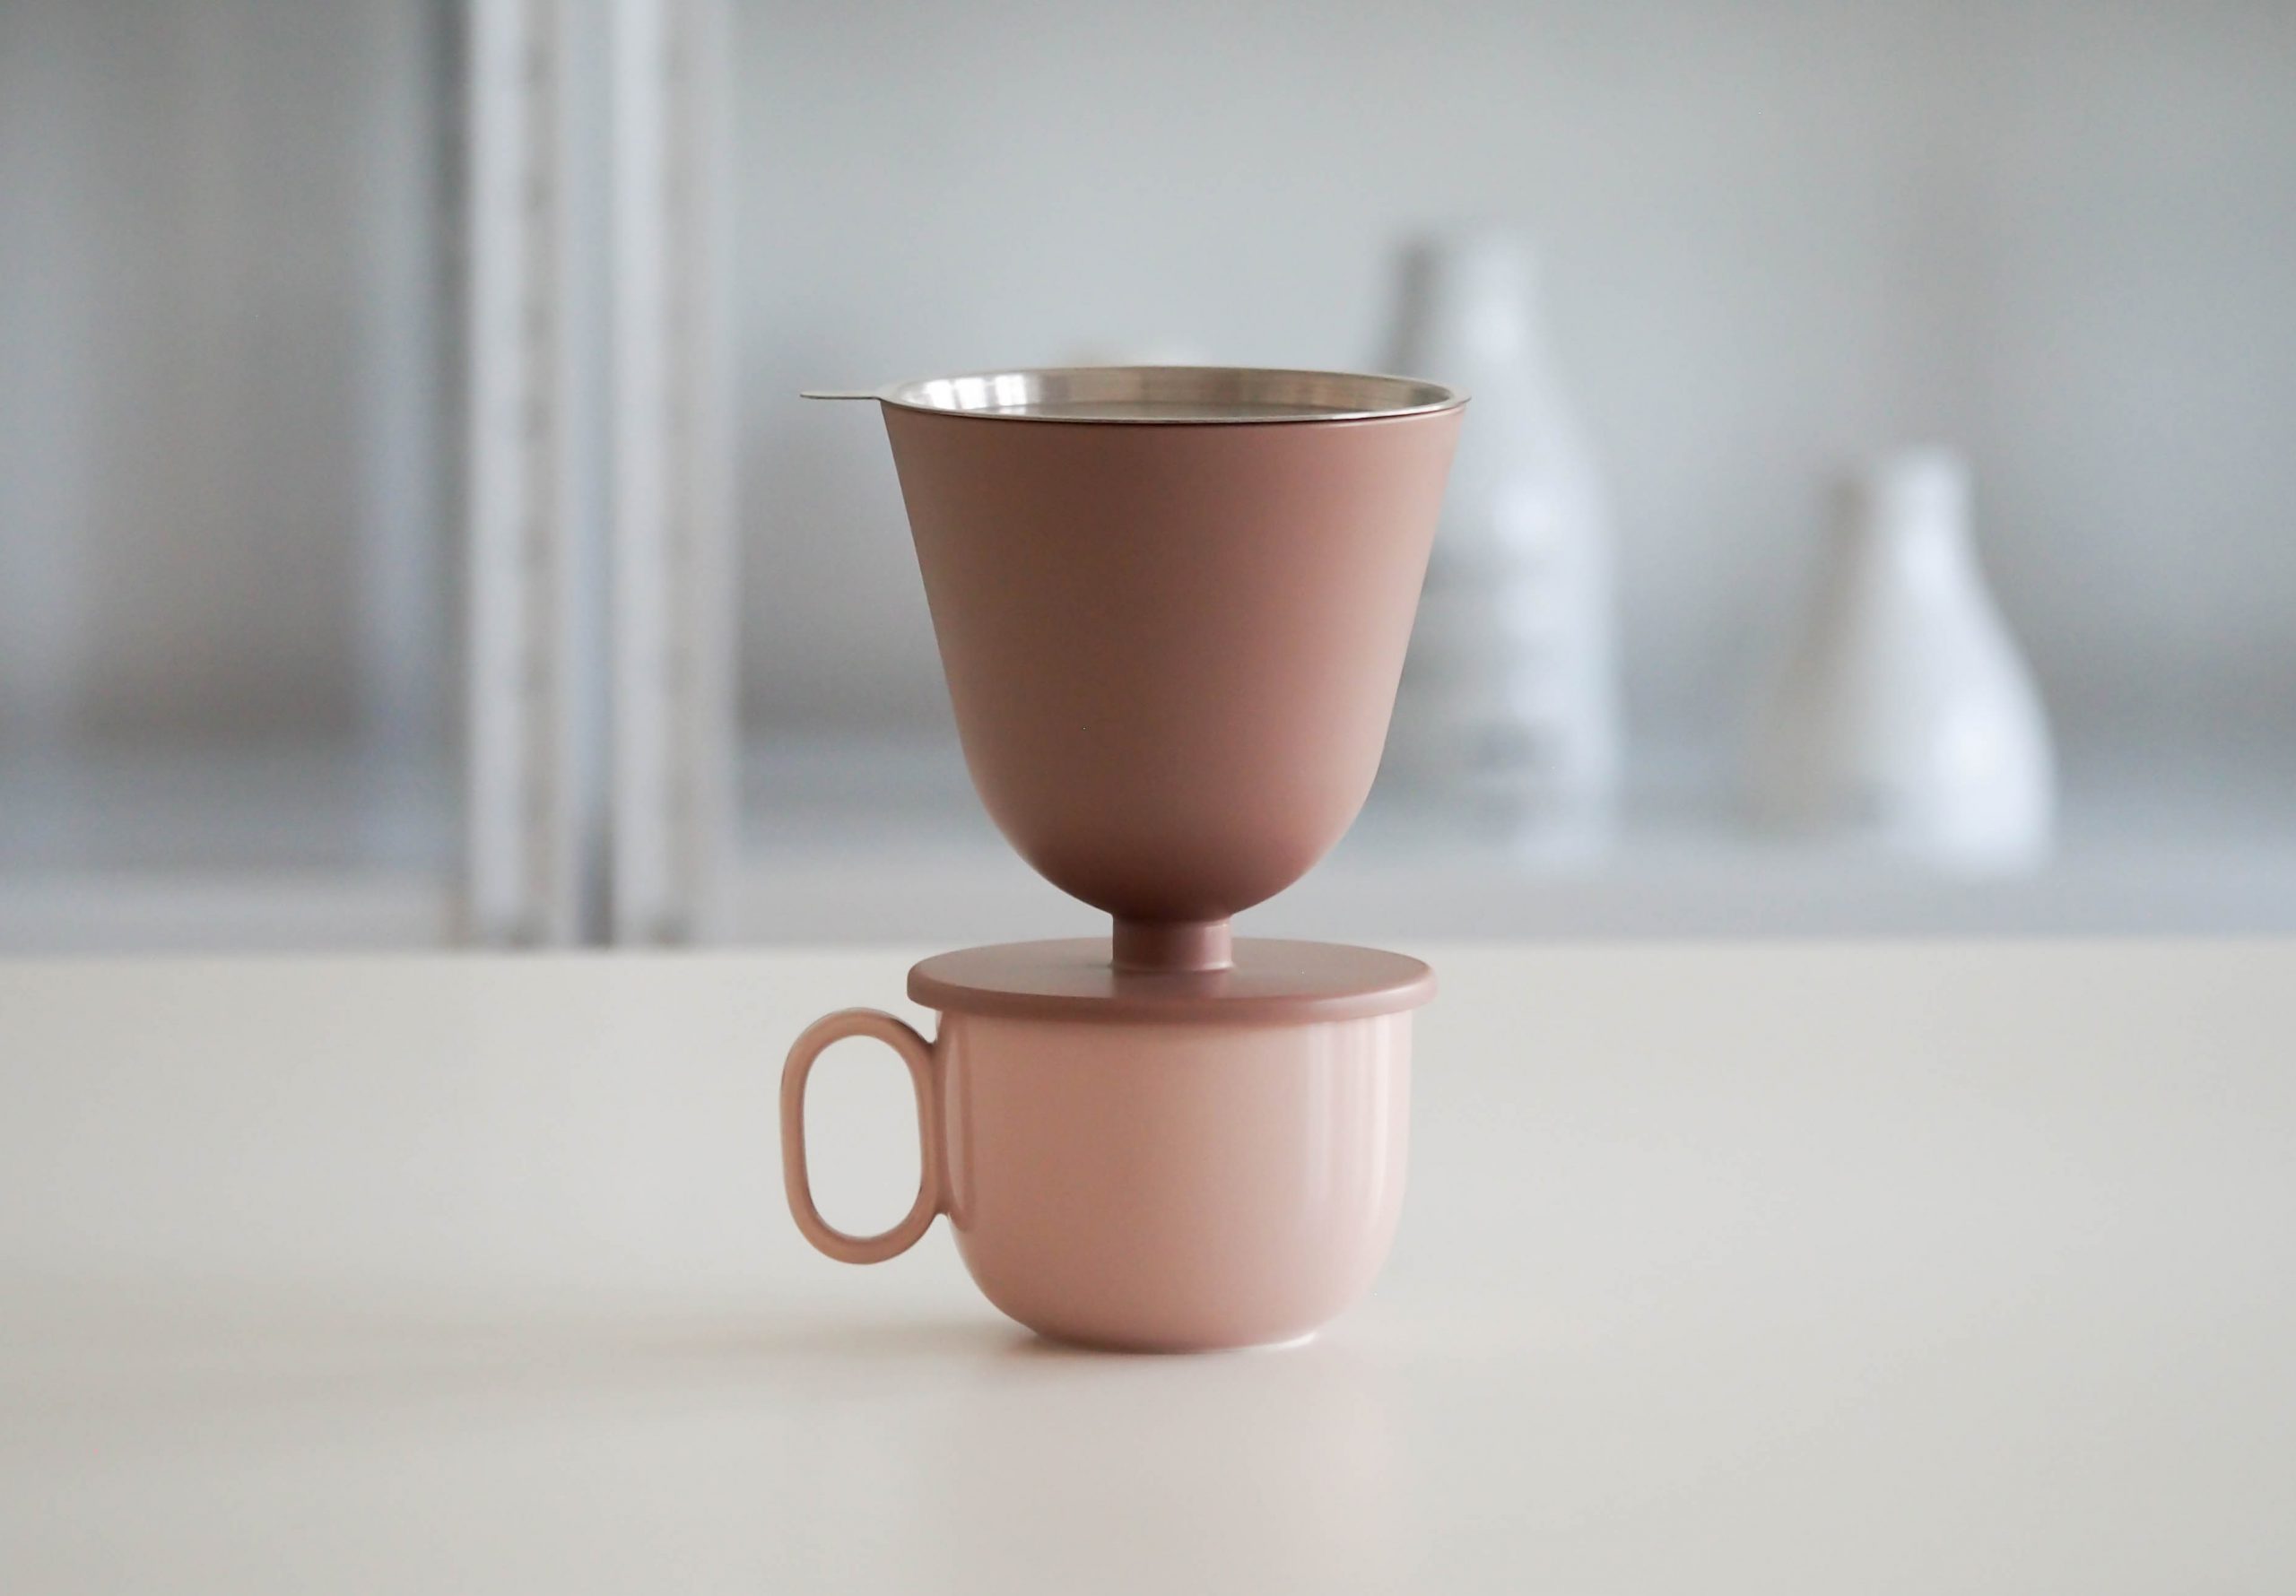 Slow coffee dripper by Debiasi Sandri for RigTig with Mix N Match cup